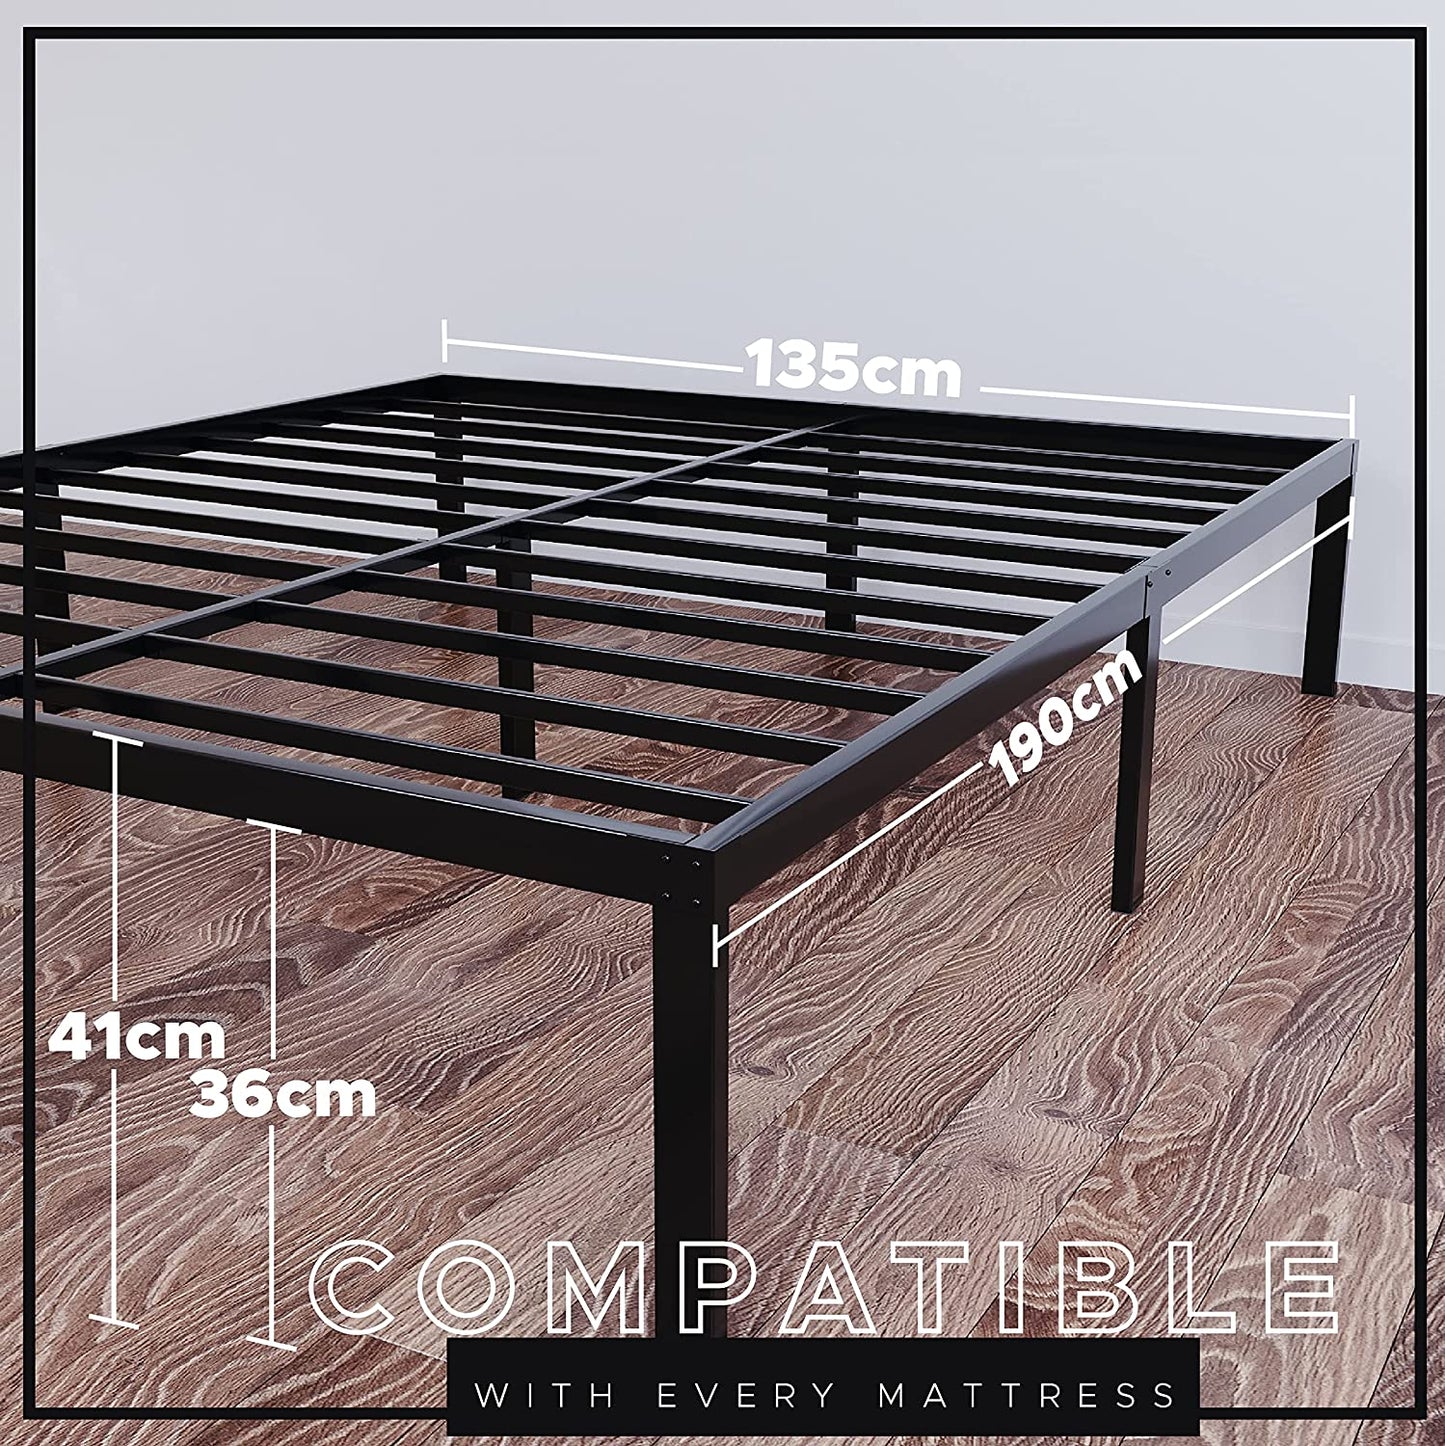 Metal Base for Bed - for Mattress 135X200 Cm - for Double Beds or Mattresses - Sturdy, Easy Assembly, Large Storage Area - Black Bed Frame